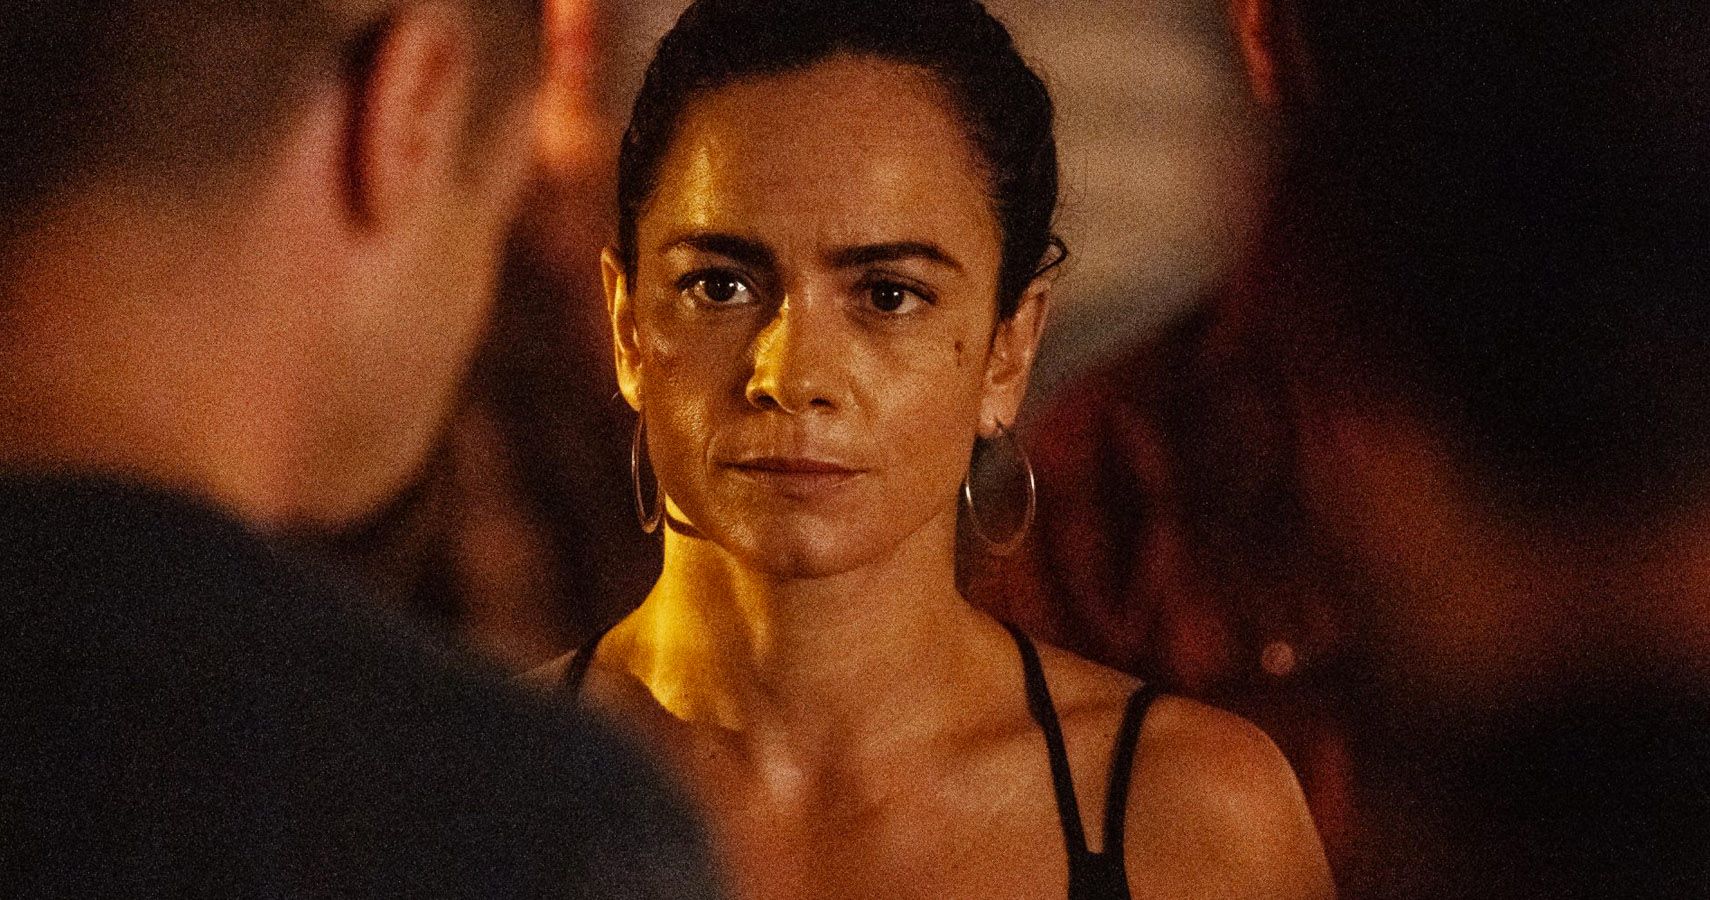 Queen of the South 10 Worst Episodes (According To IMDb)